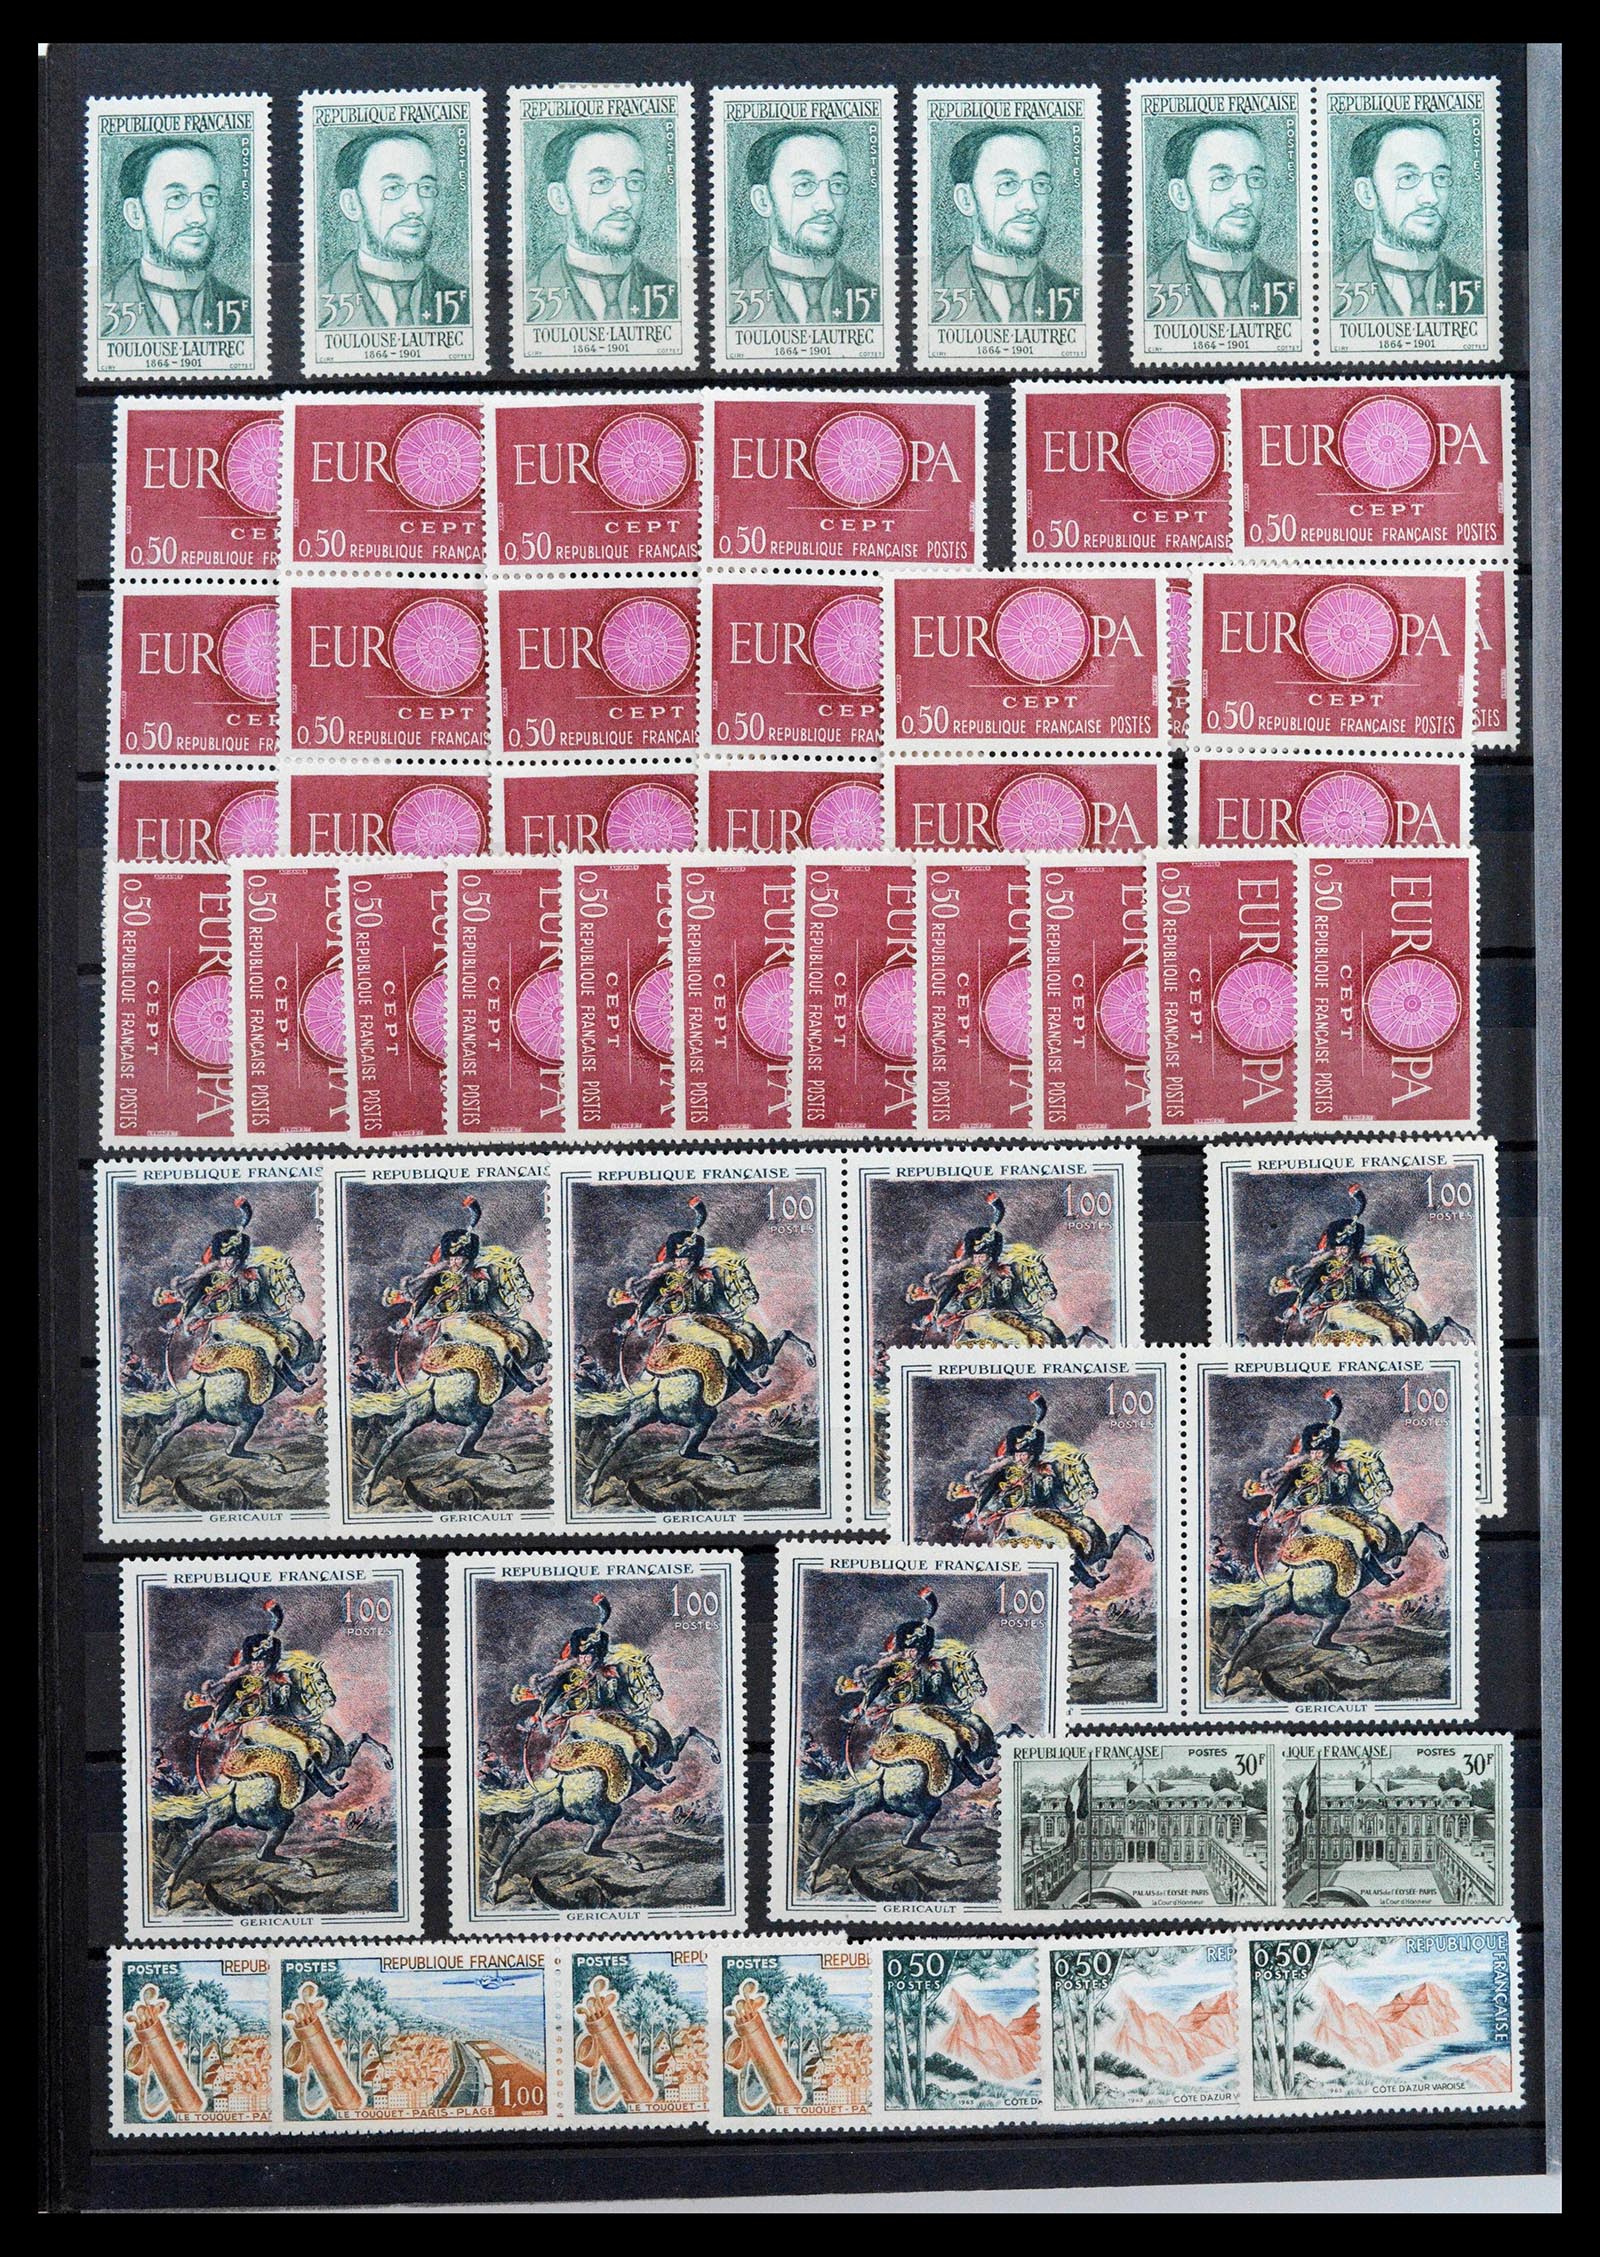 39423 0014 - Stamp collection 39423 France varieties 1862-1985.